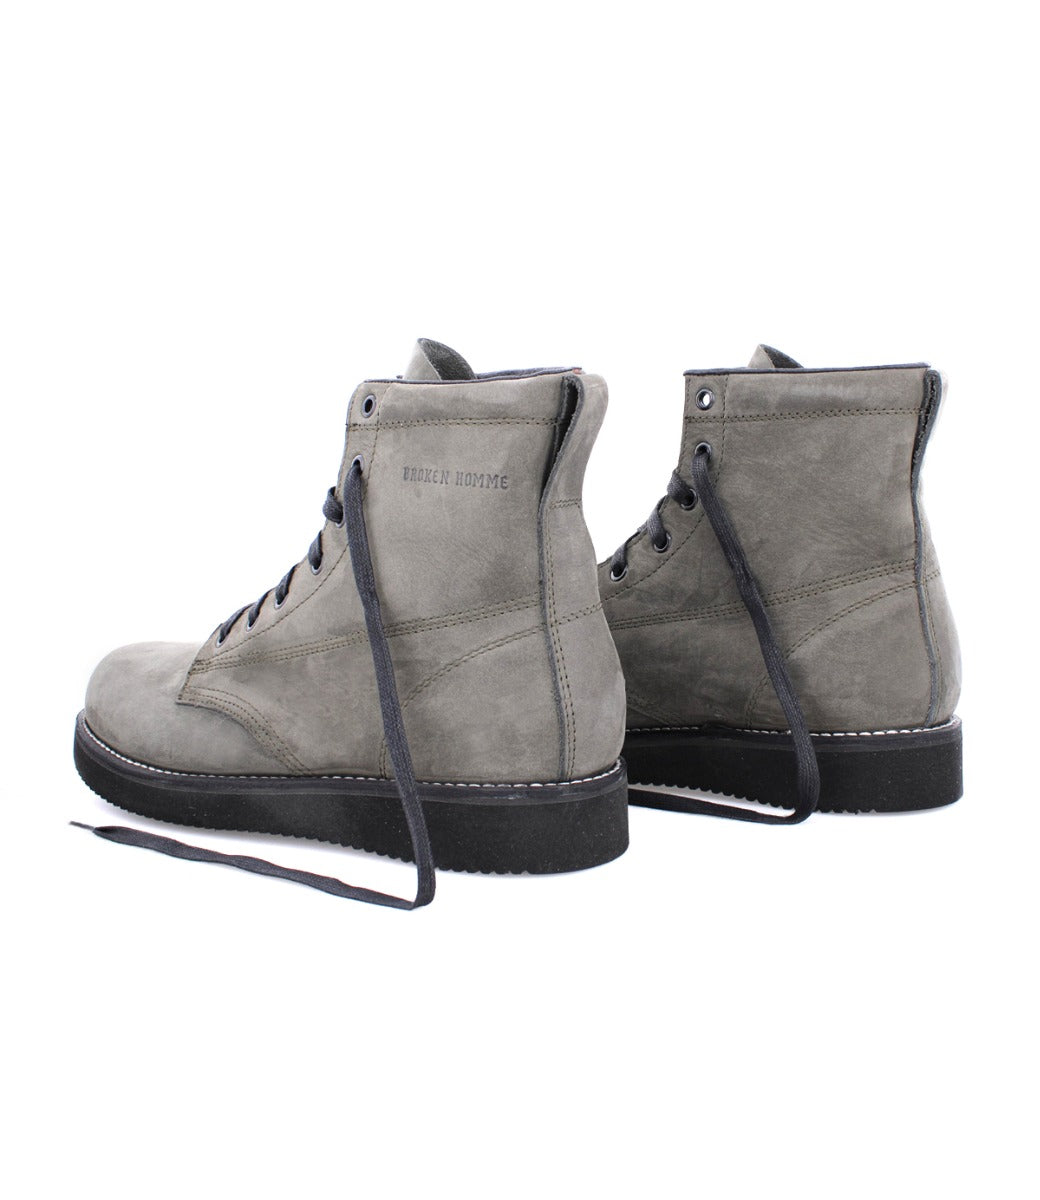 A pair of James Boots from the Broken Homme collection, featuring black laces.